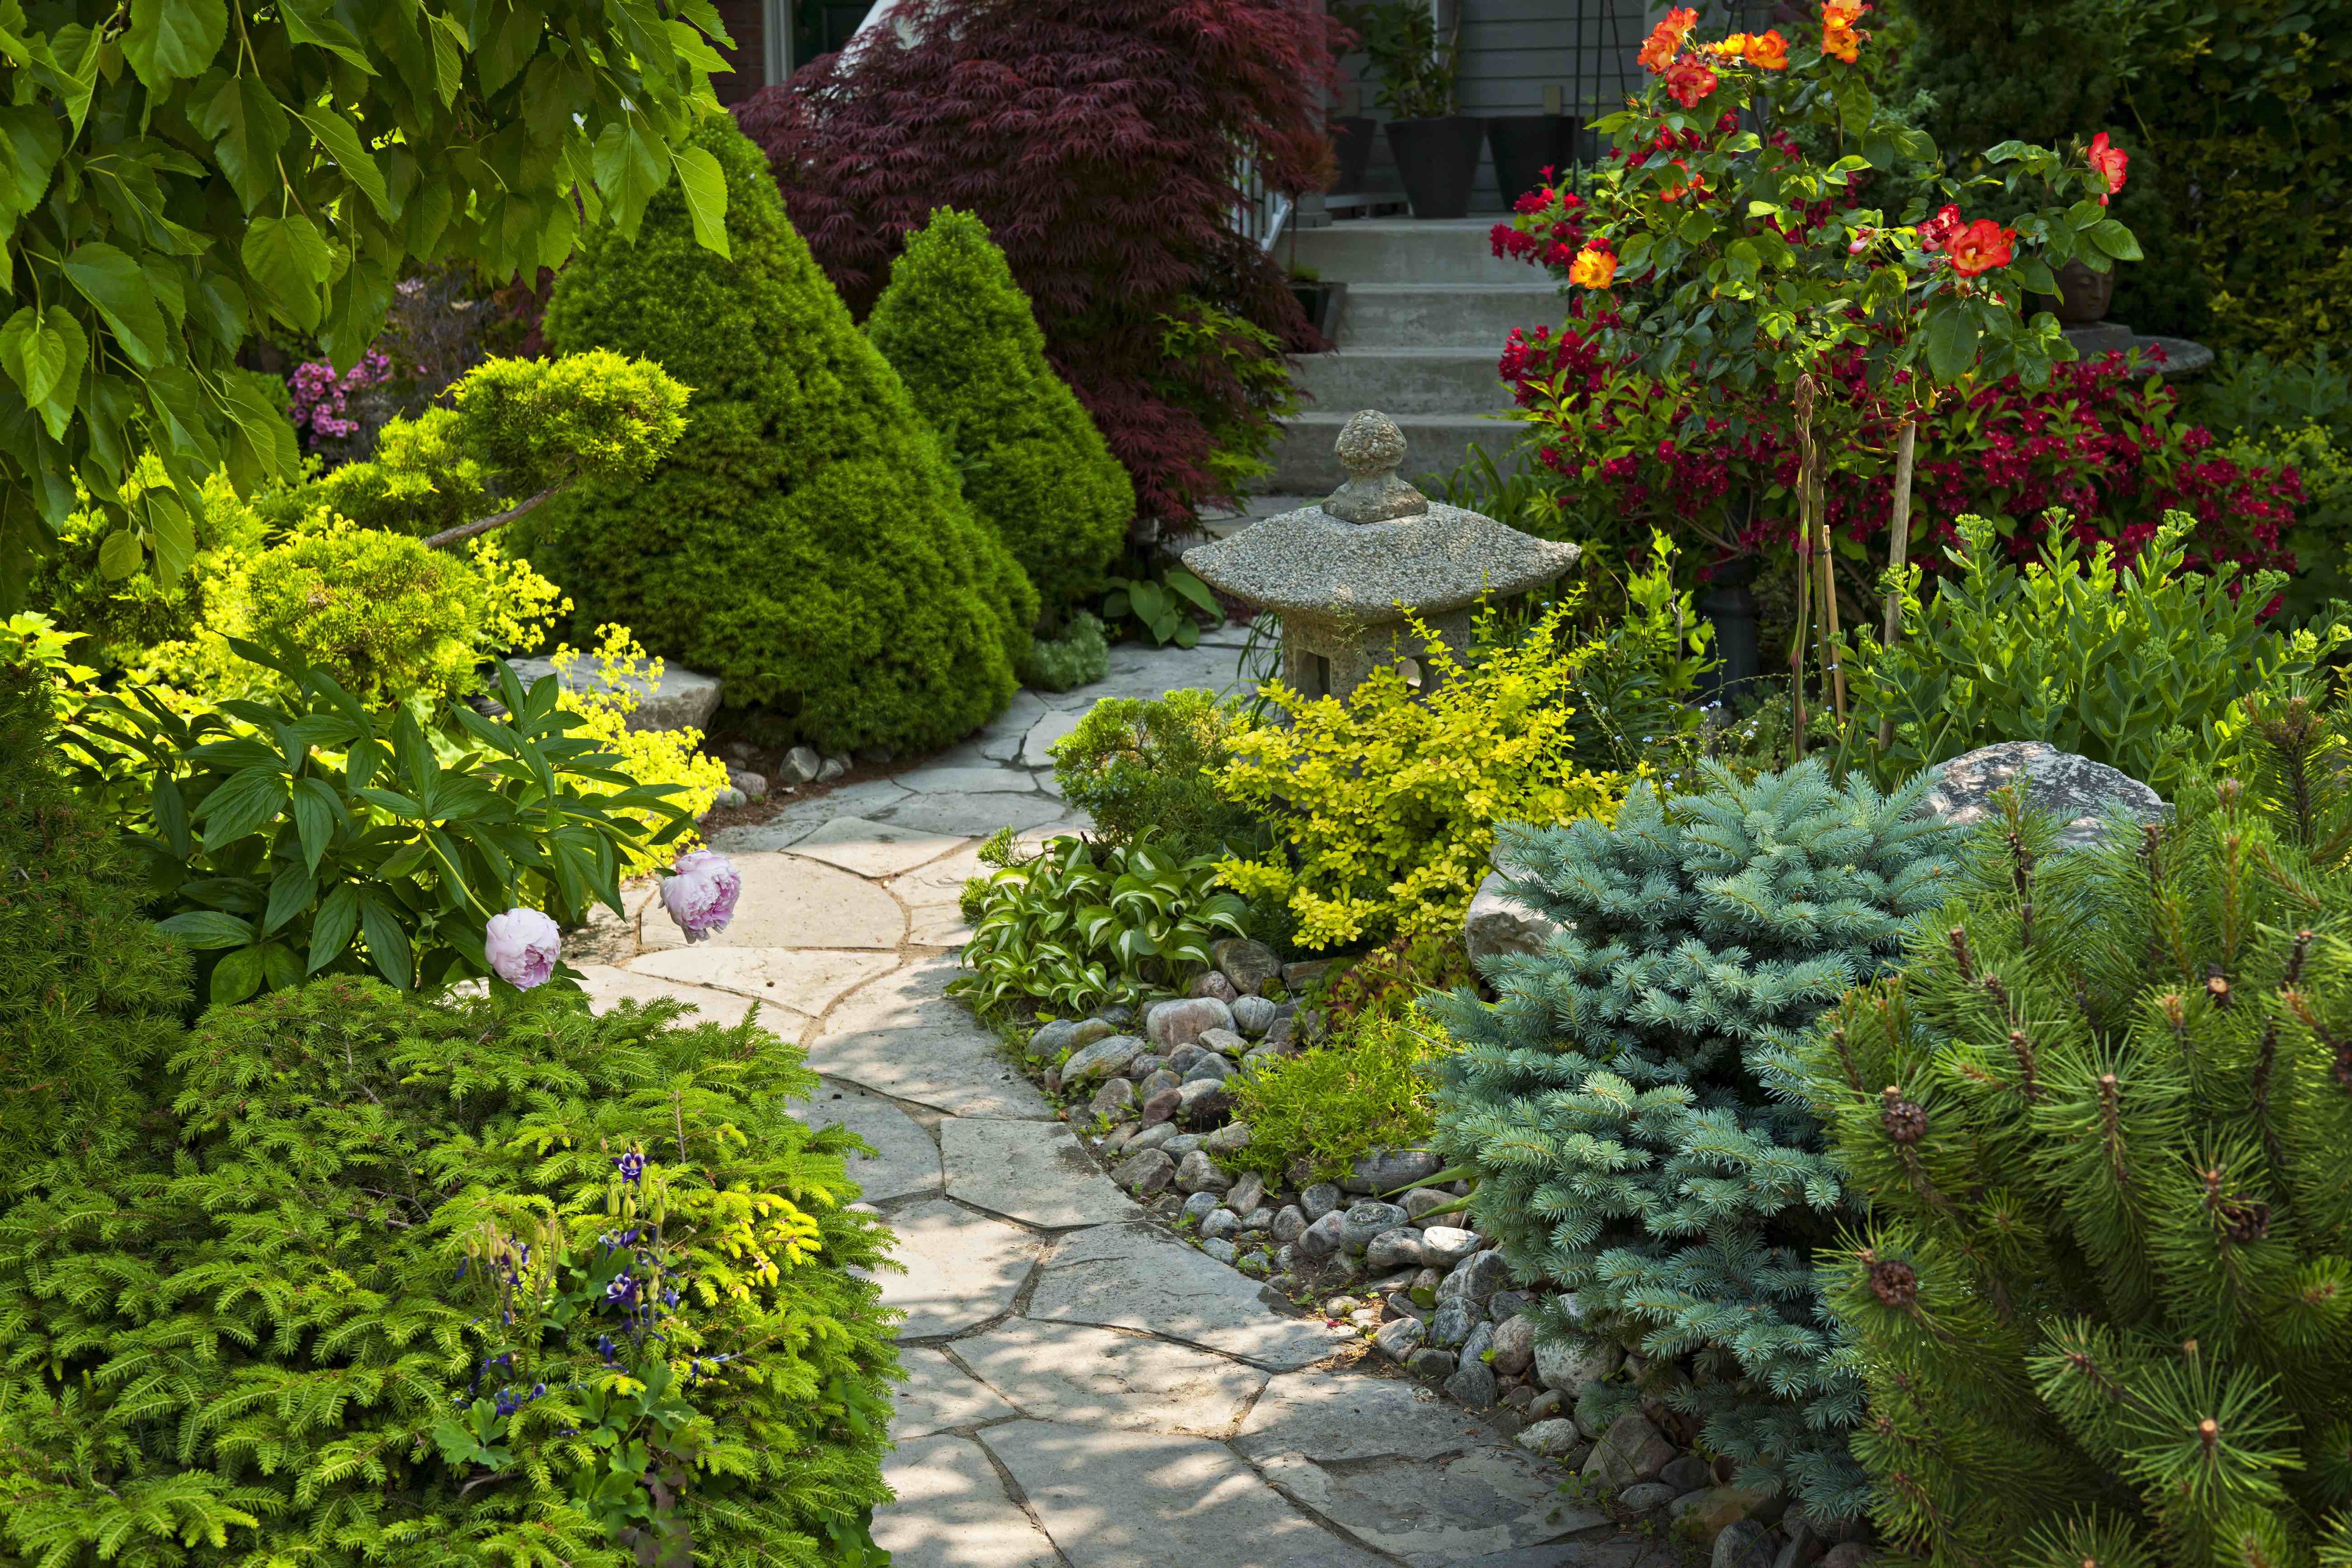  when choosing your landscaping materials for your landscaping project